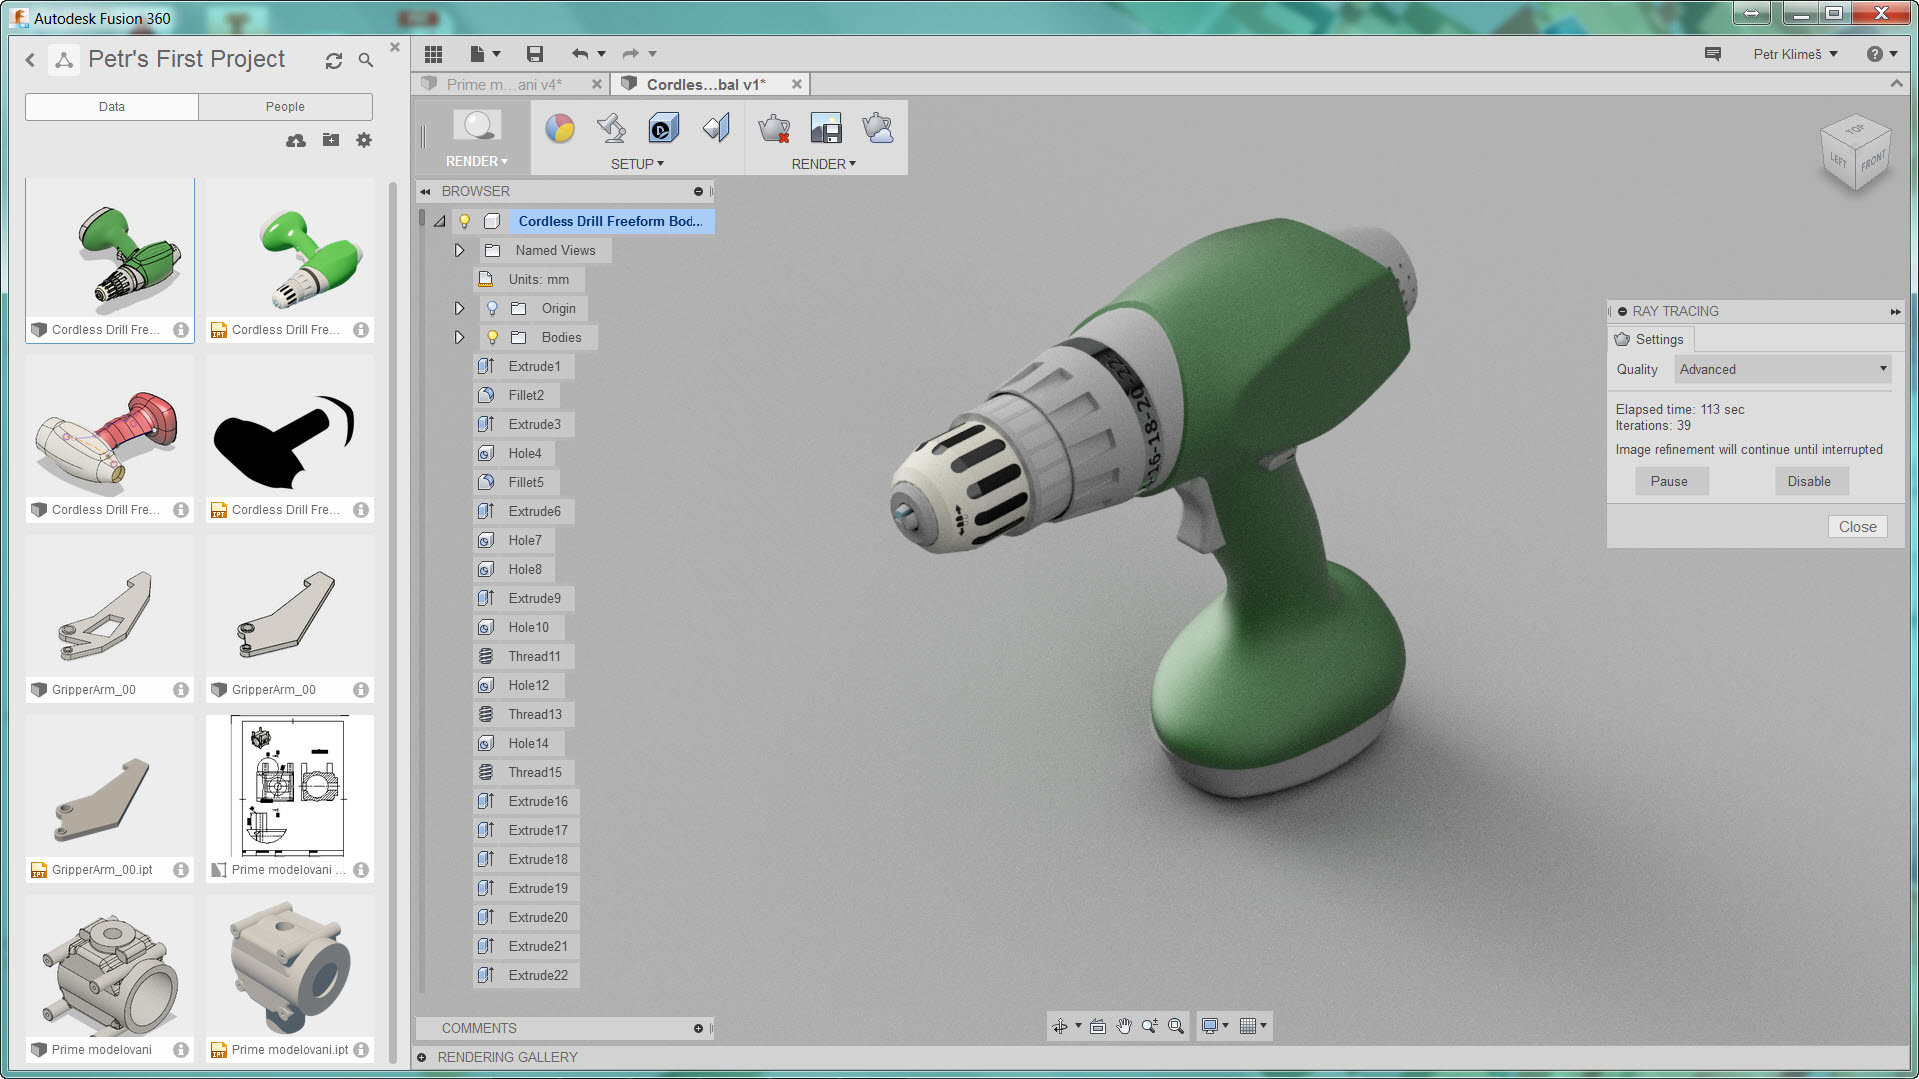 autodesk fusion 360 student download